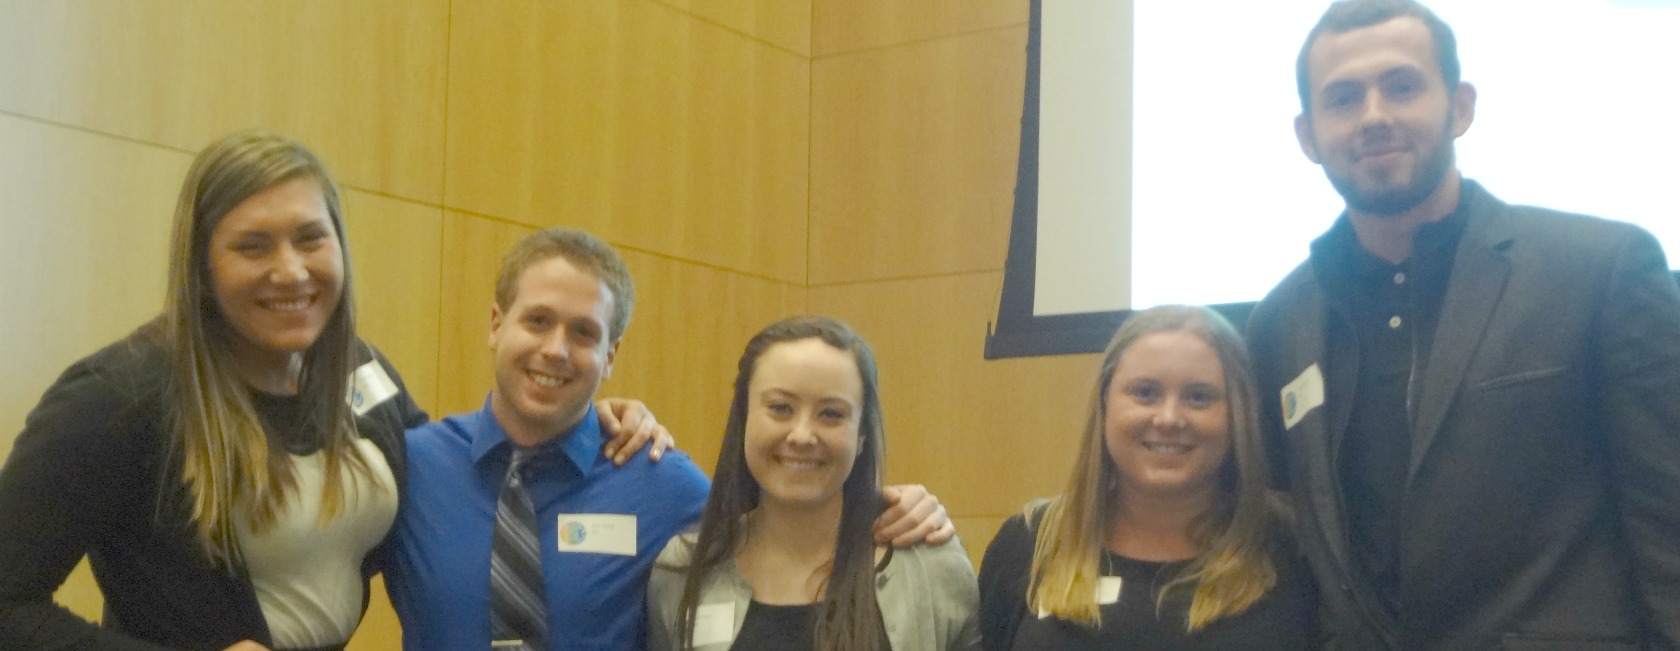 A Marketing Management team made up of, from left, Taylor Gonzales, Kevin McKay, Kayla Evans, Lindsey Campbell and Austen Wilson (all ’15), took first place in a track of the 2015 Business Plan Competition.